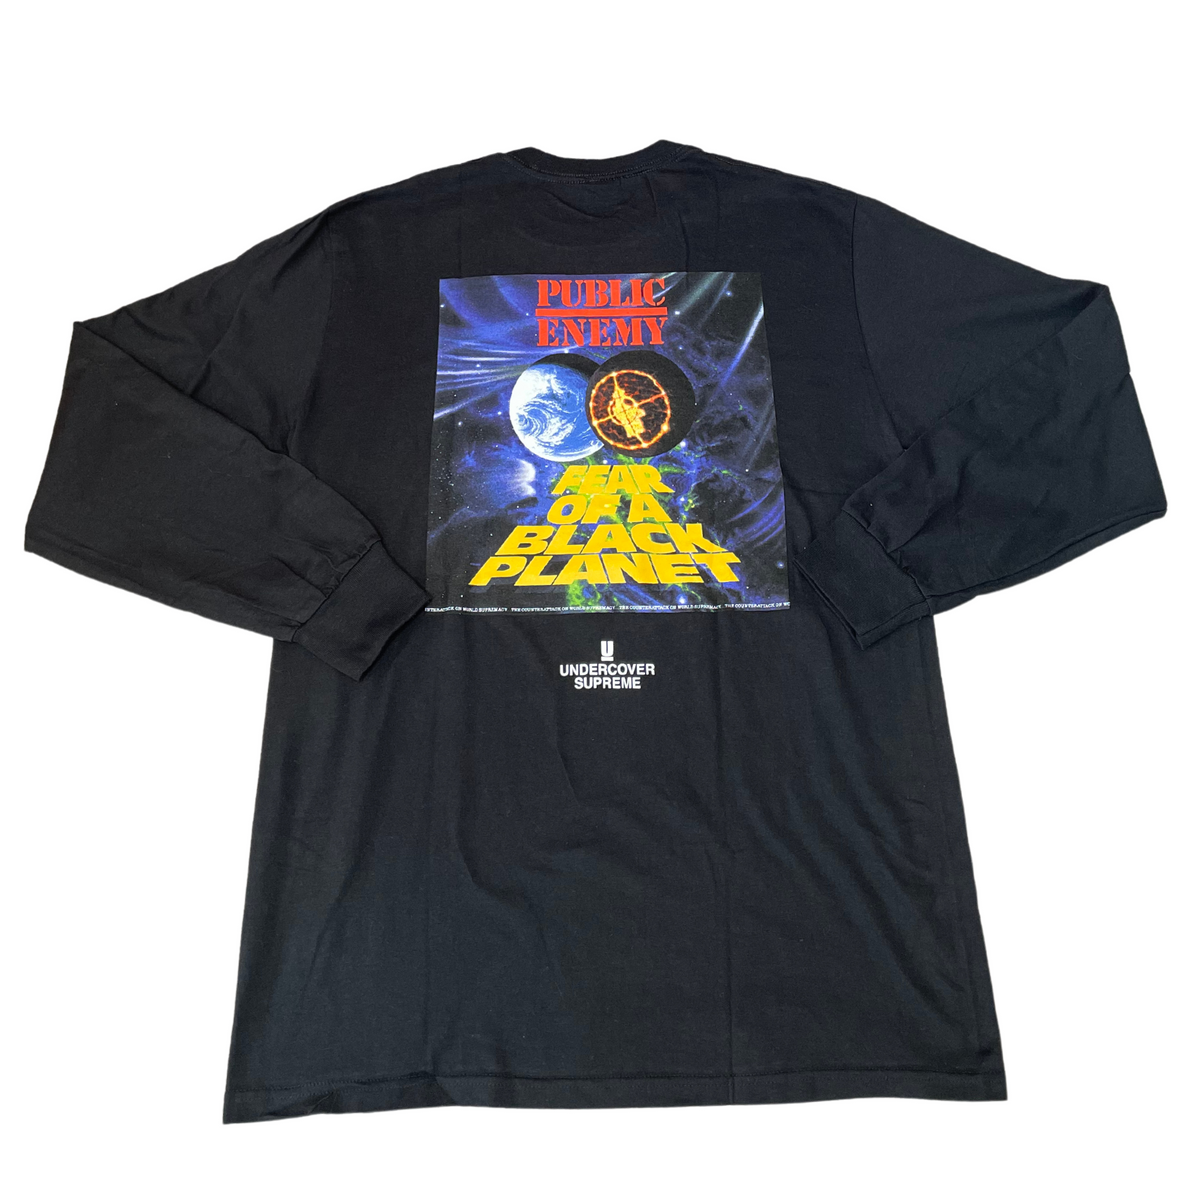 Supreme / Undercover / Public Enemy Counterattack Longsleeve T